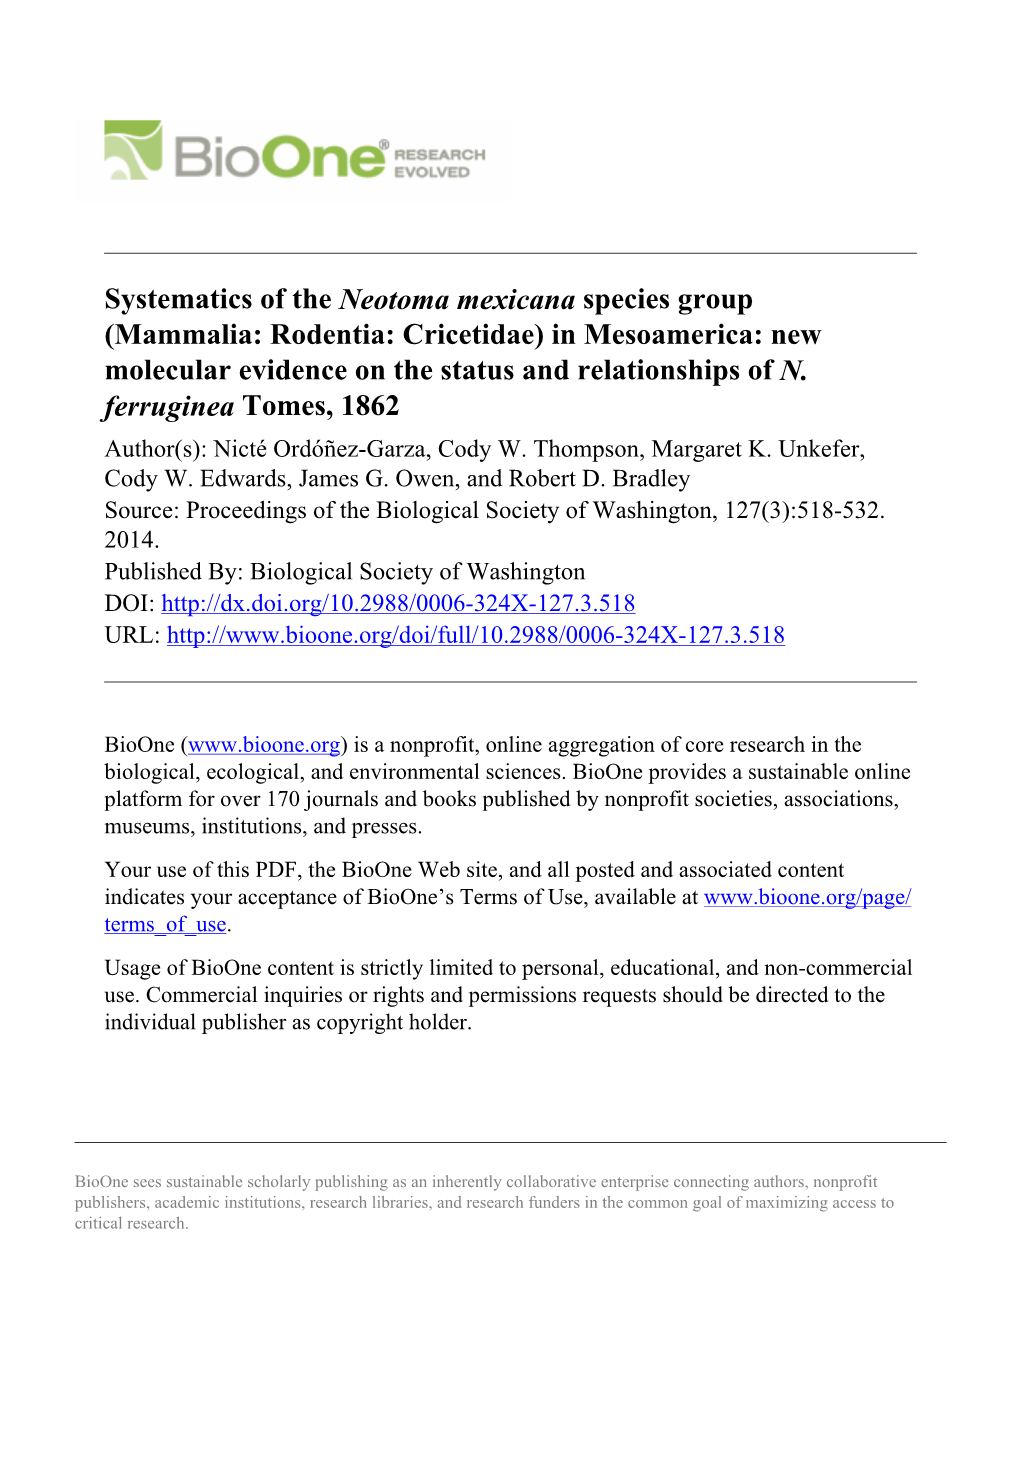 Systematics of the Neotoma Mexicana Species Group (Mammalia: Rodentia: Cricetidae) in Mesoamerica: New Molecular Evidence on the Status and Relationships of N